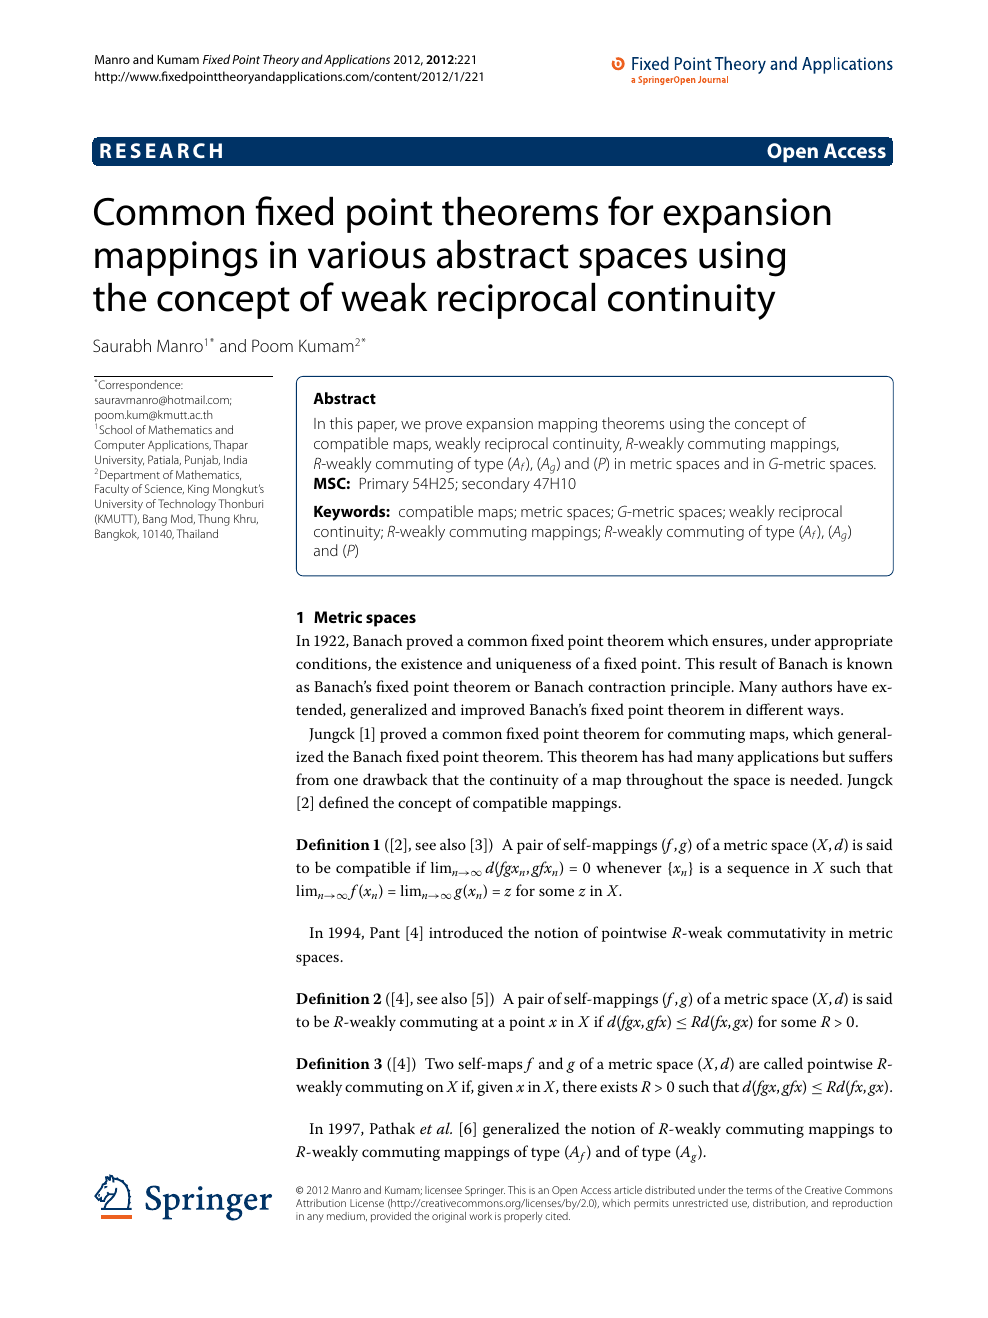 Common Fixed Point Theorems For Expansion Mappings In Various Abstract Spaces Using The Concept Of Weak Reciprocal Continuity Topic Of Research Paper In Mathematics Download Scholarly Article Pdf And Read For